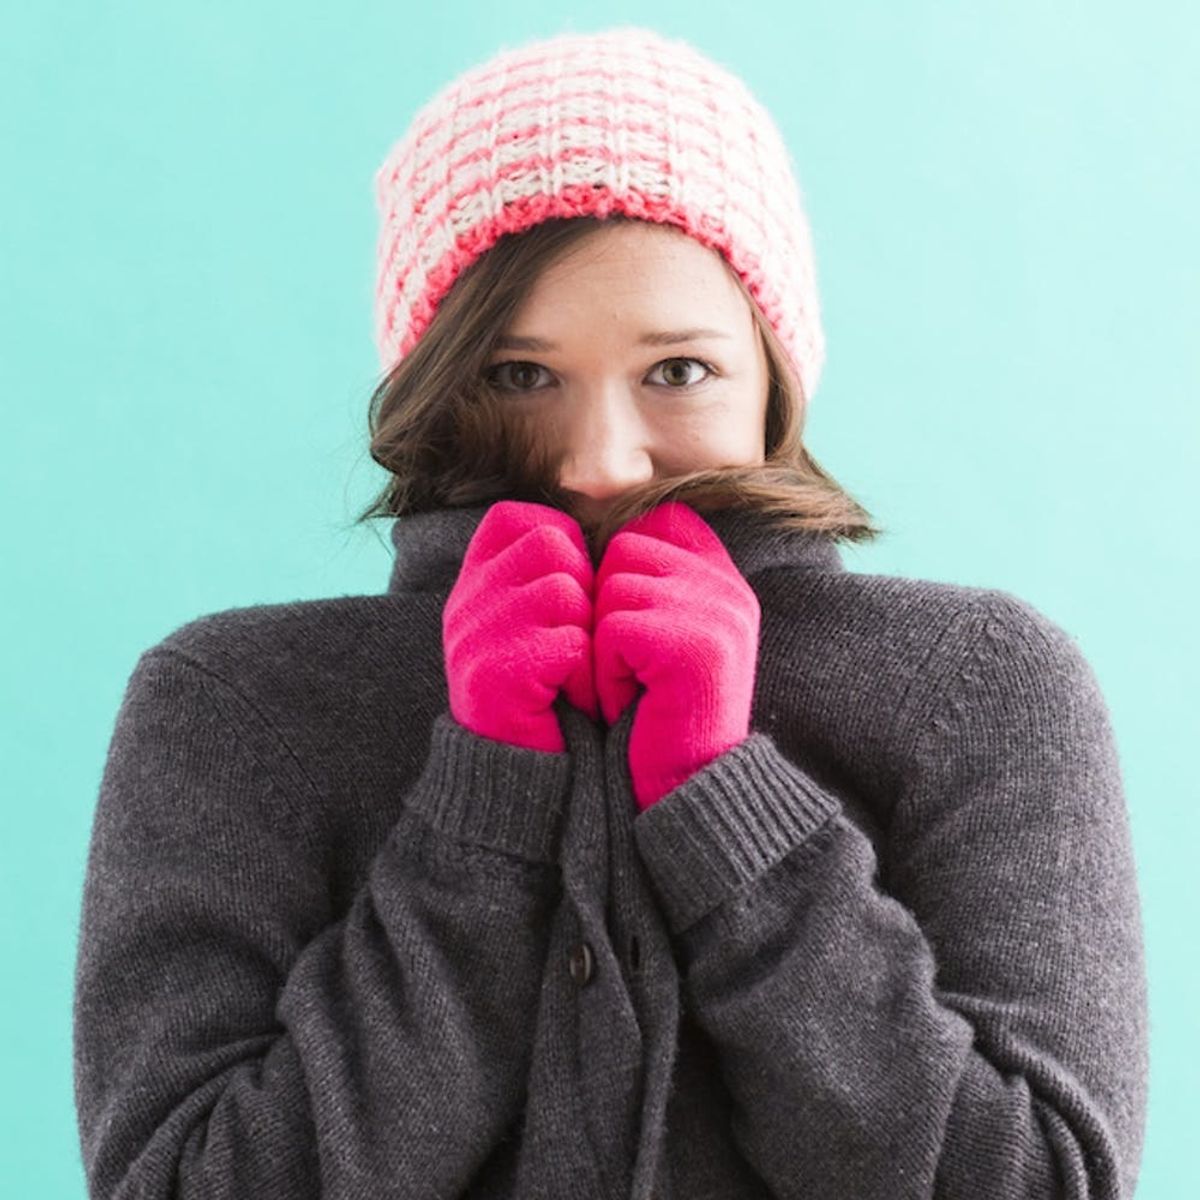 8 Cold Weather Skincare Tips from a Celebrity Esthetician